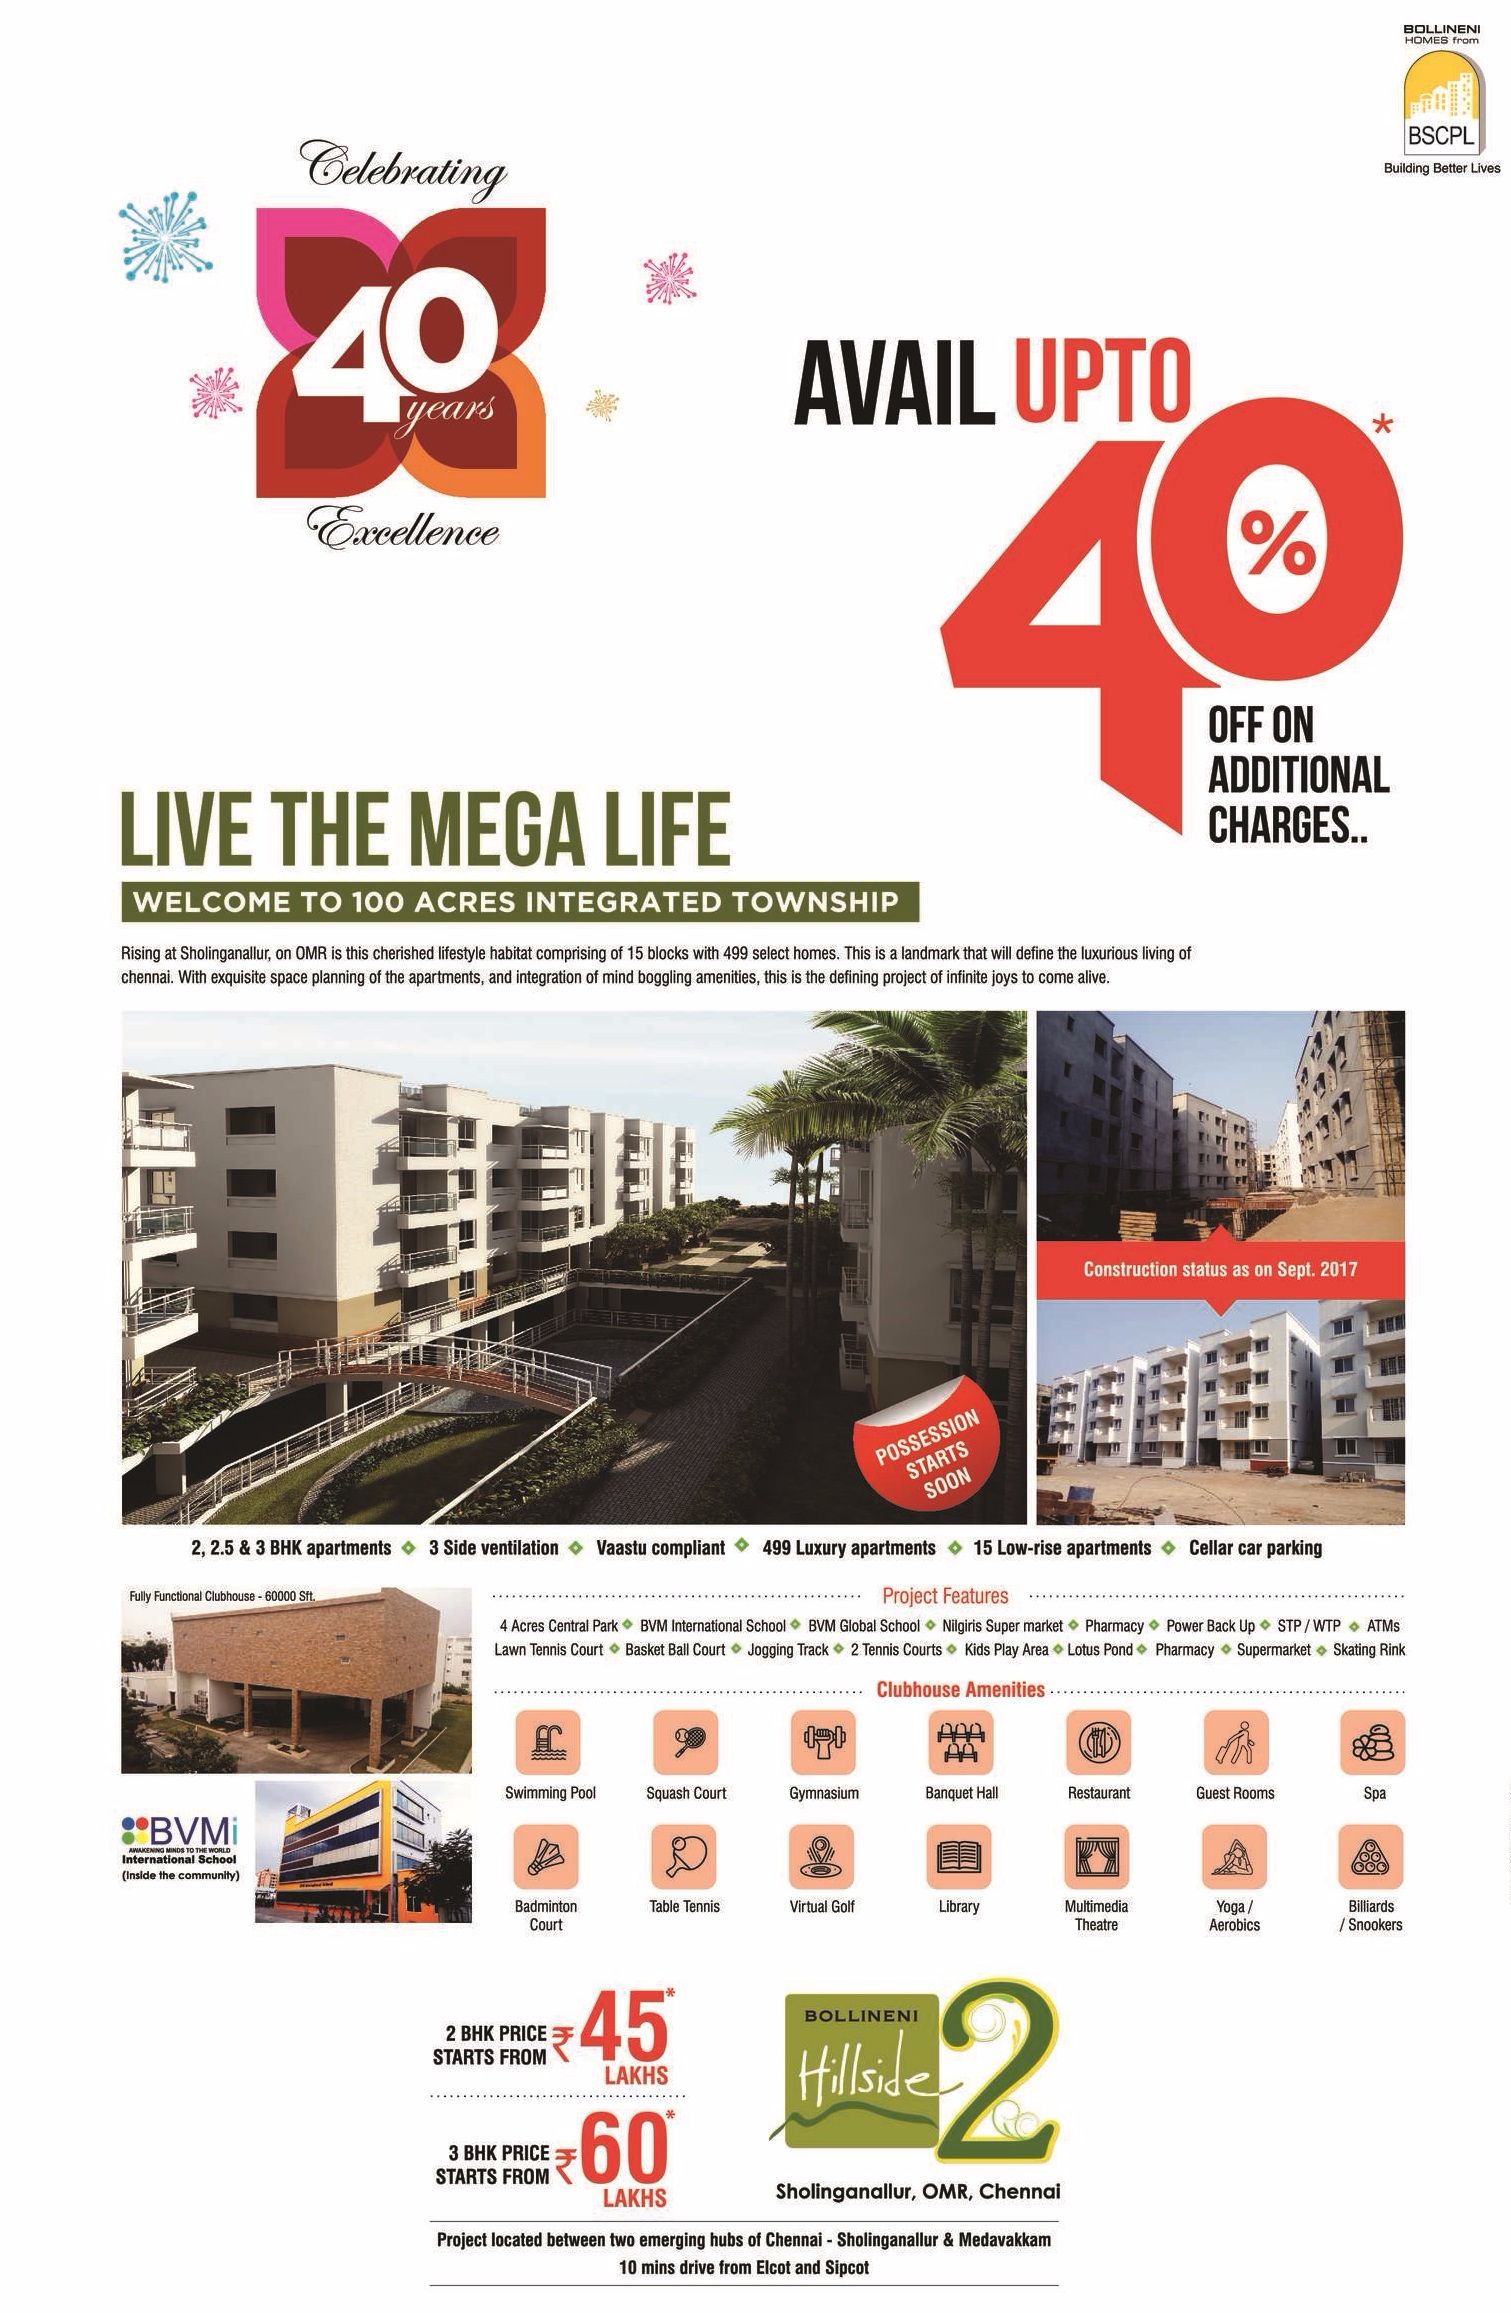 Live the mega life in 100 acres integrated township at BSCPL Bollineni Hillside II in Chennai